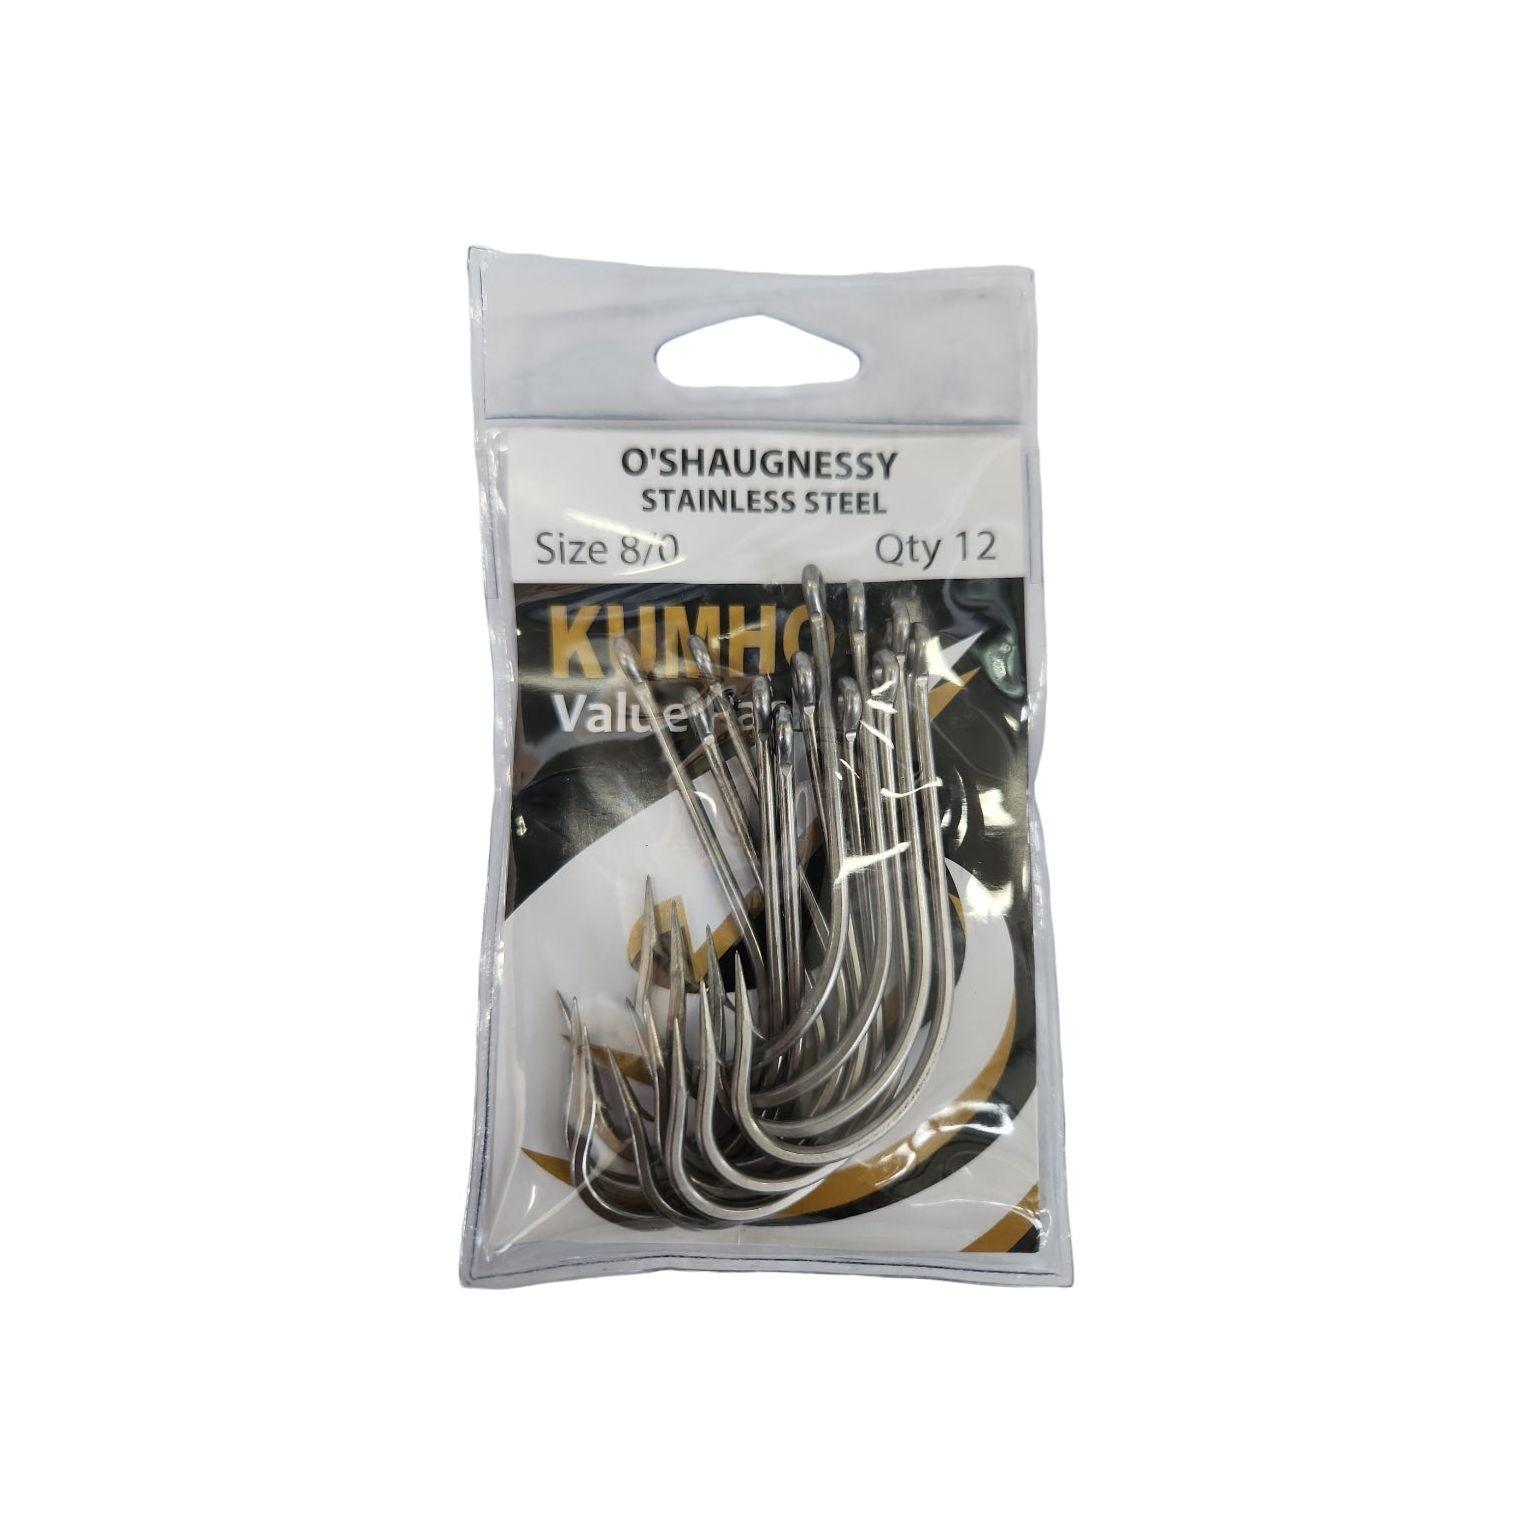 http://www.addicttackle.com.au/cdn/shop/files/kumho-stainless-steel-o-shaughnessy-hooks-value-pack-by-kumho-at-addict-tackle.jpg?v=1709101863